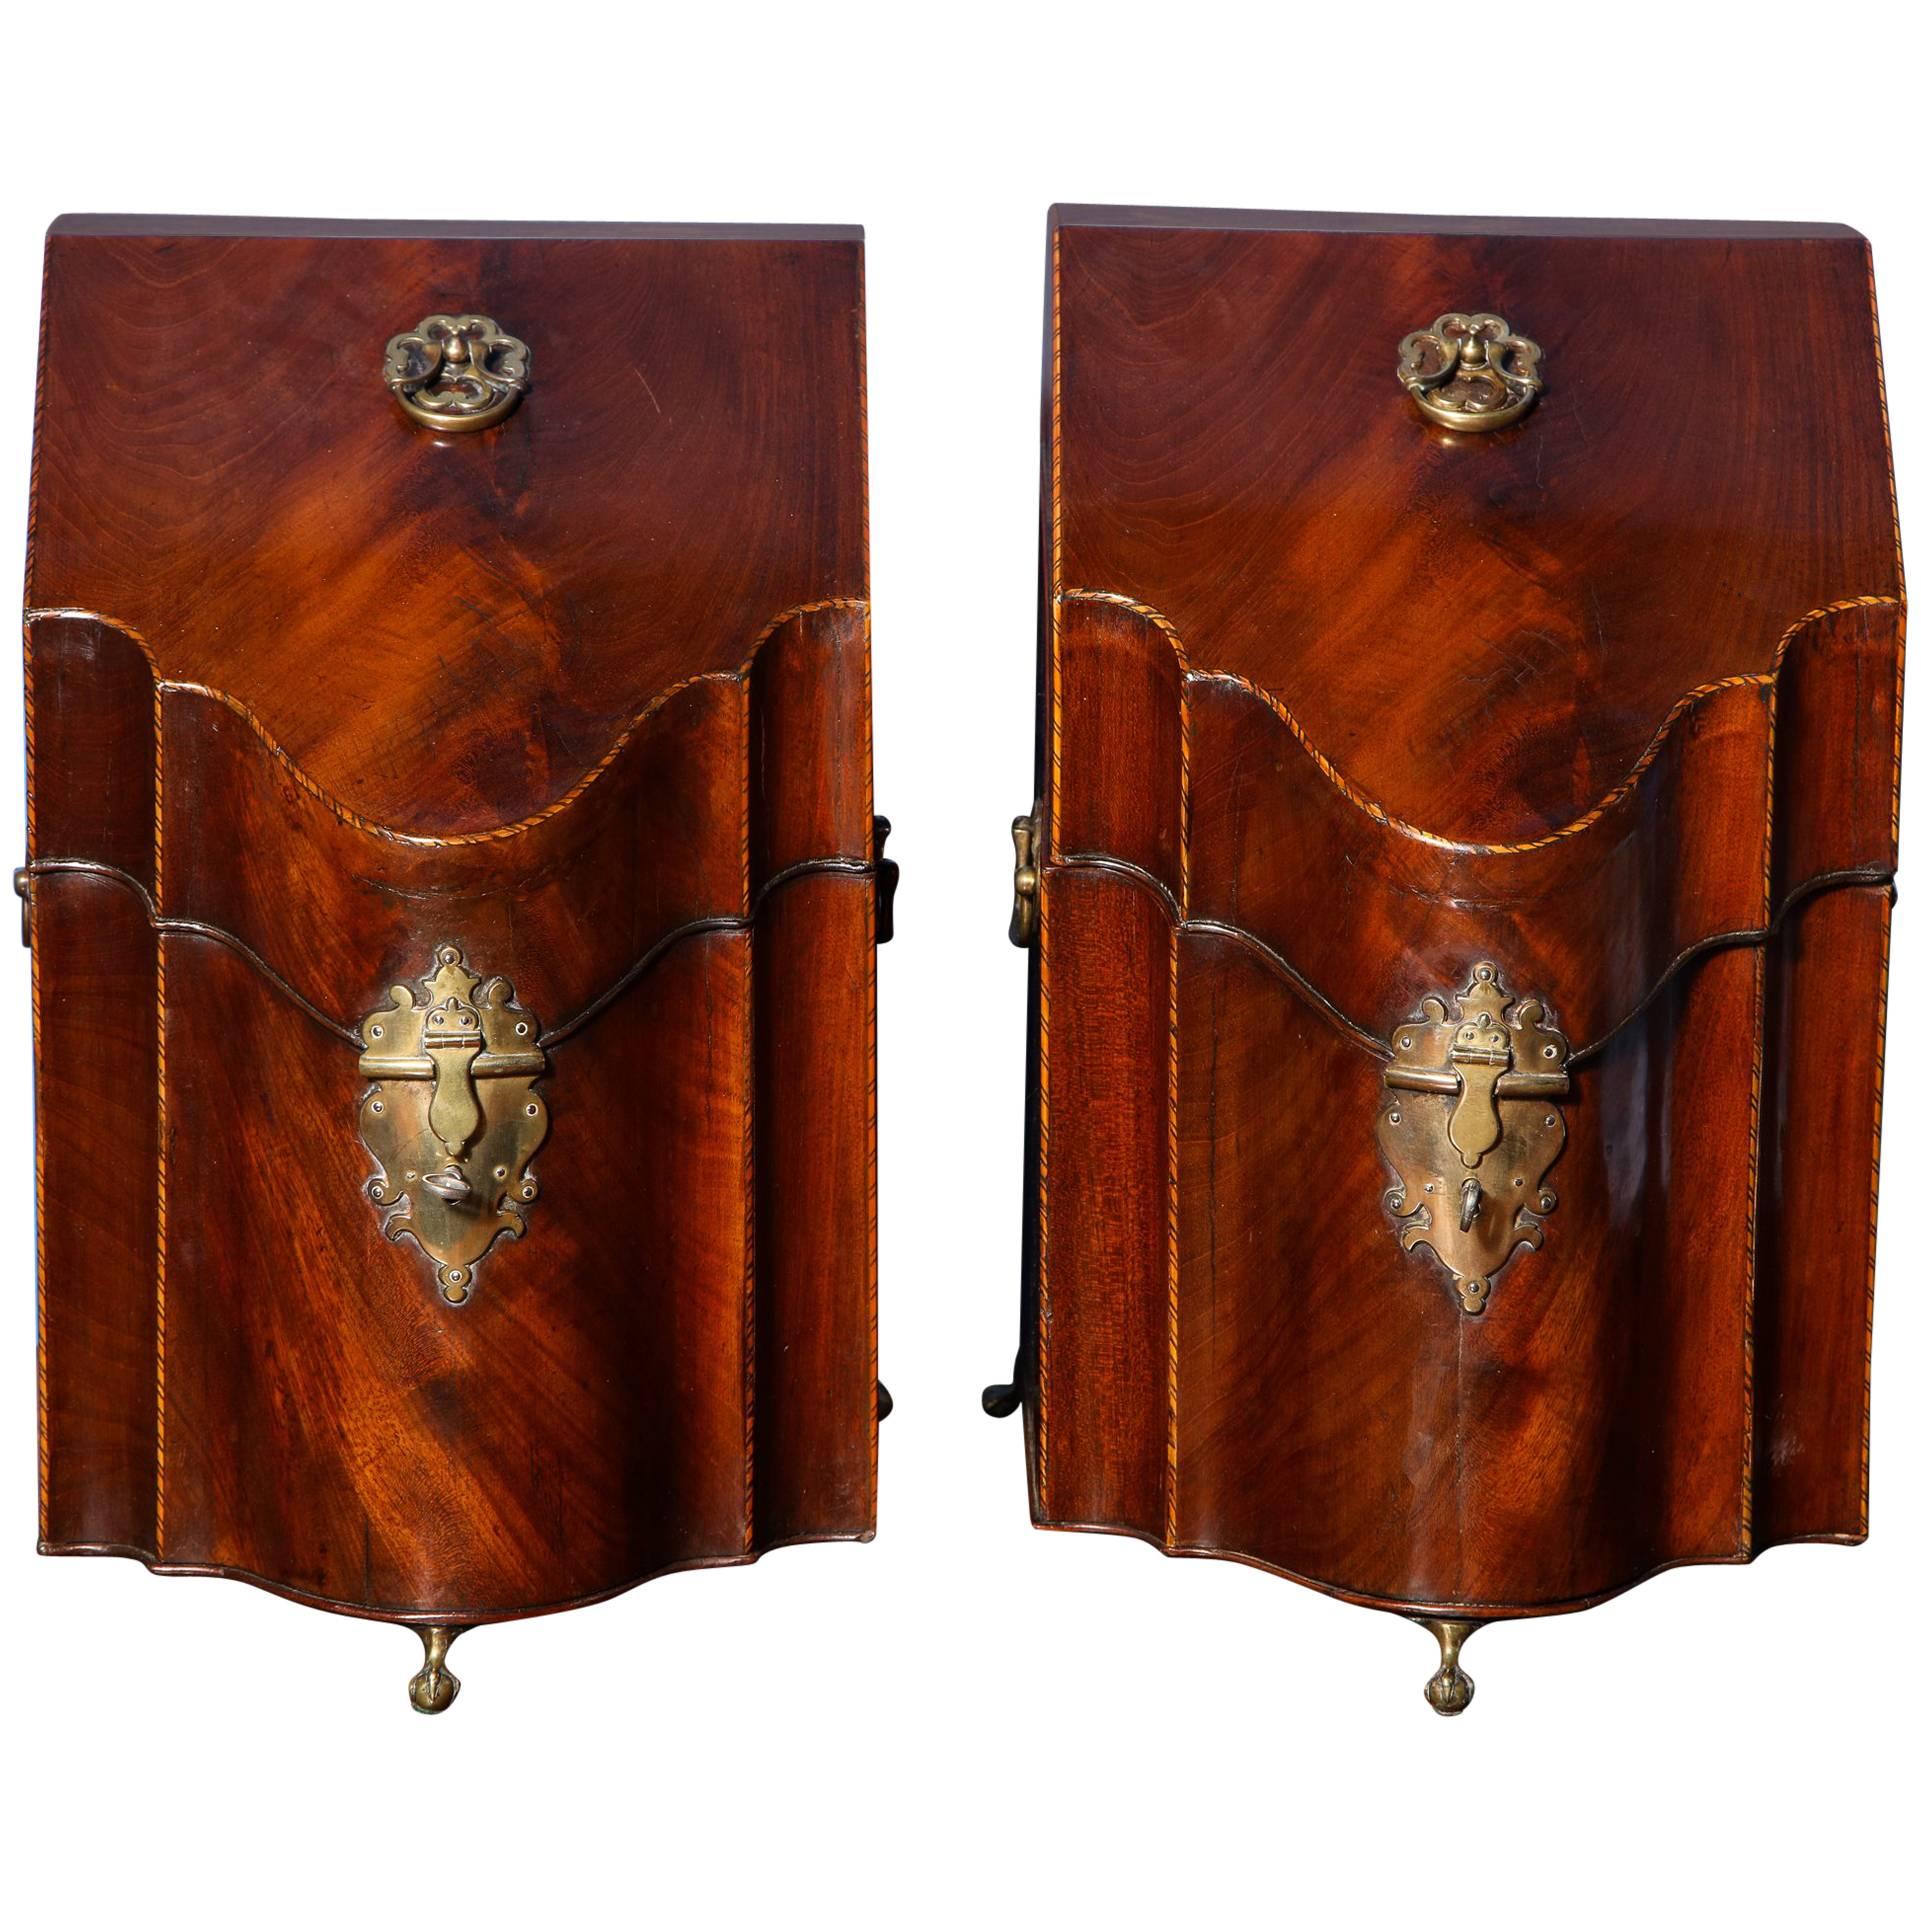 Pair of George III Period Serpentine Mahogany Knife Boxes English, circa 1770 For Sale